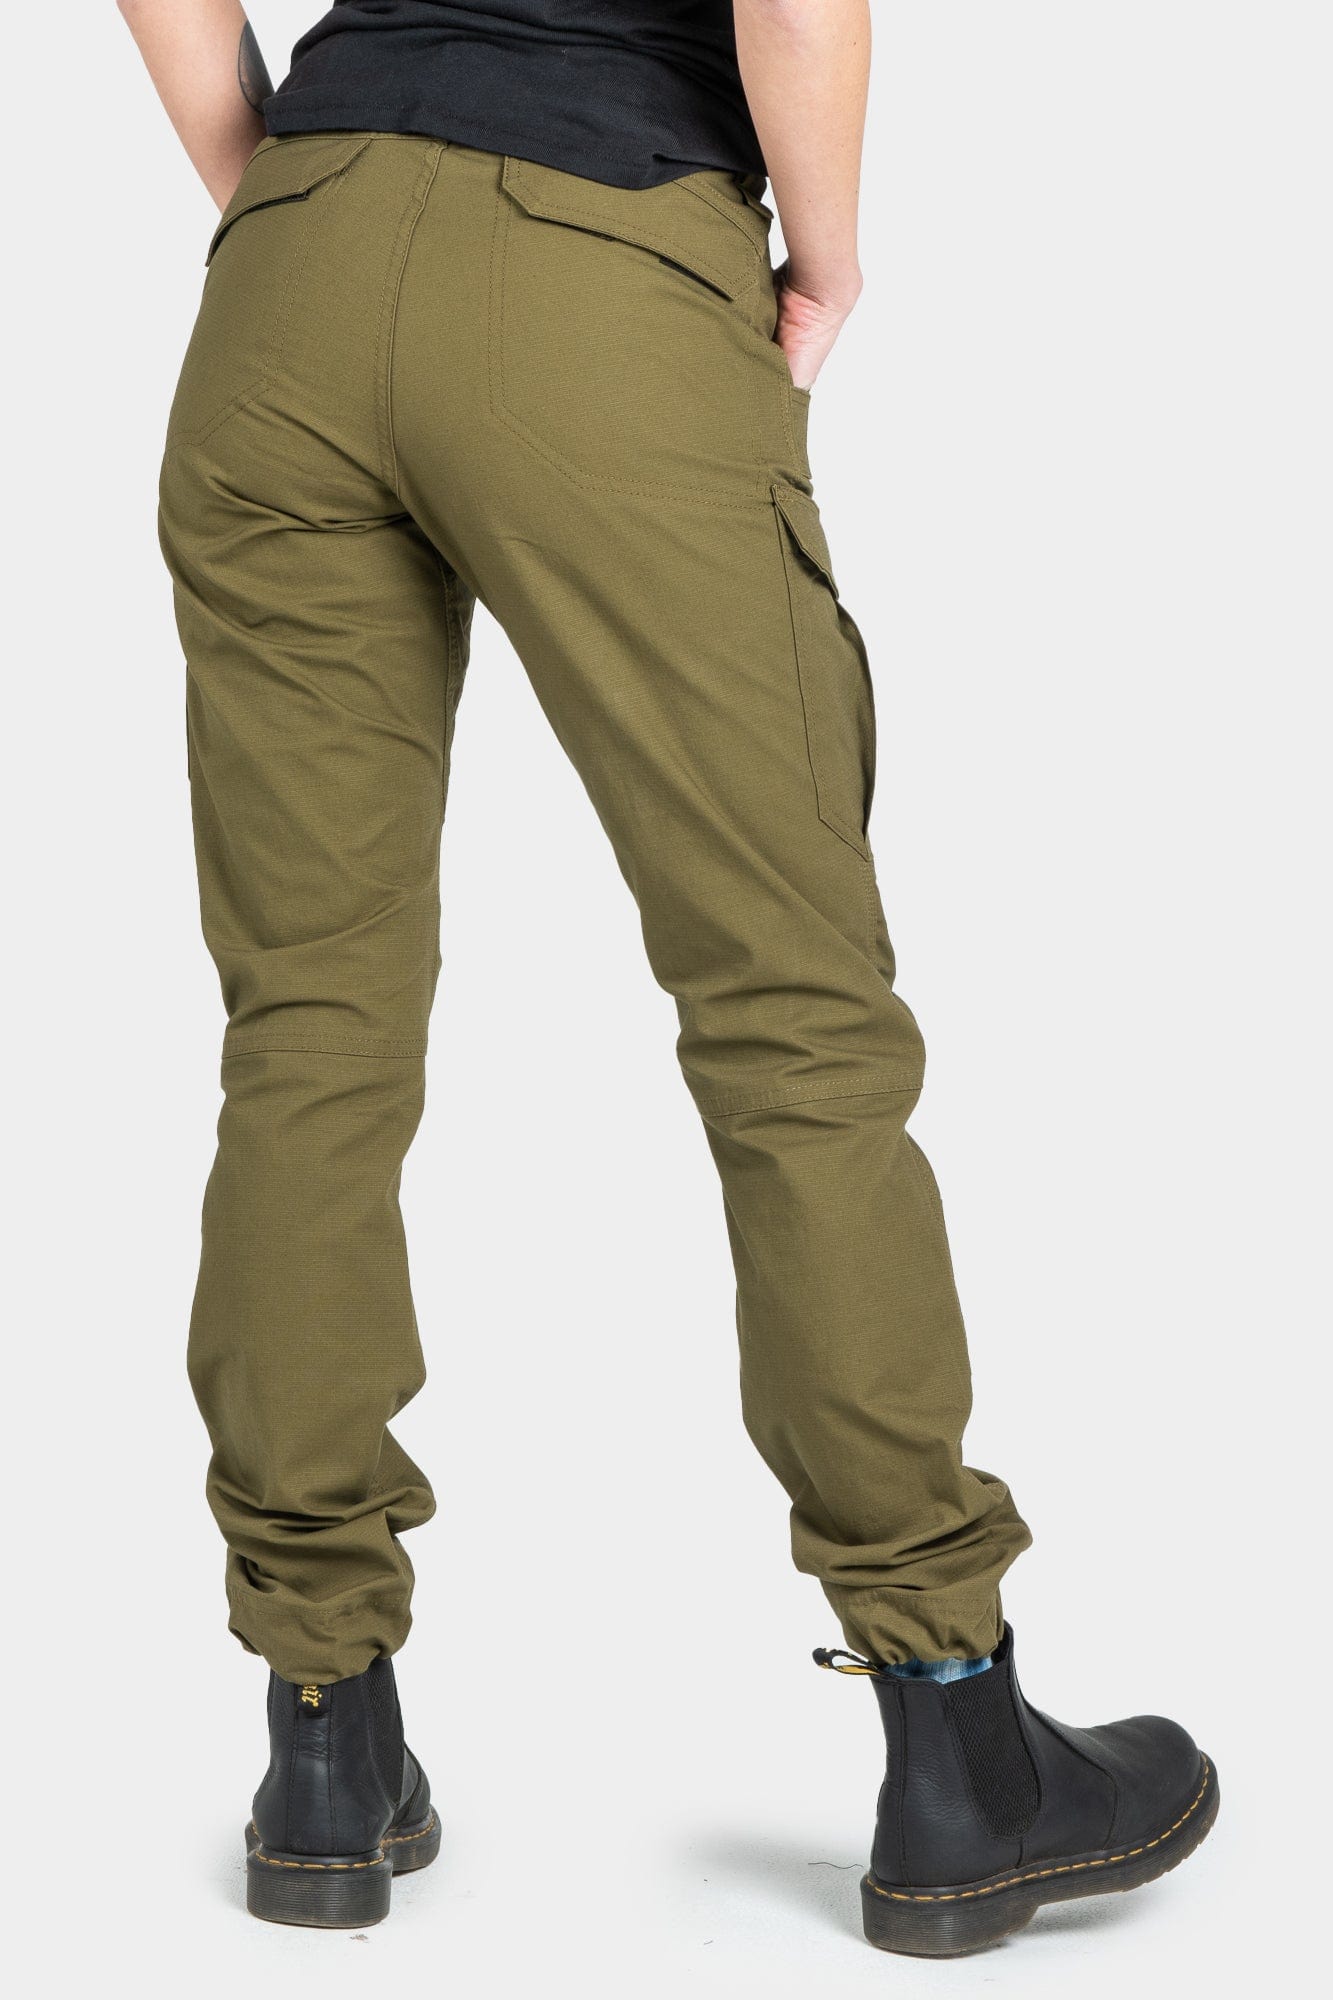 Ready Set Cargo in Olive Green CORDURA® Ripstop Work Pants Dovetail Workwear